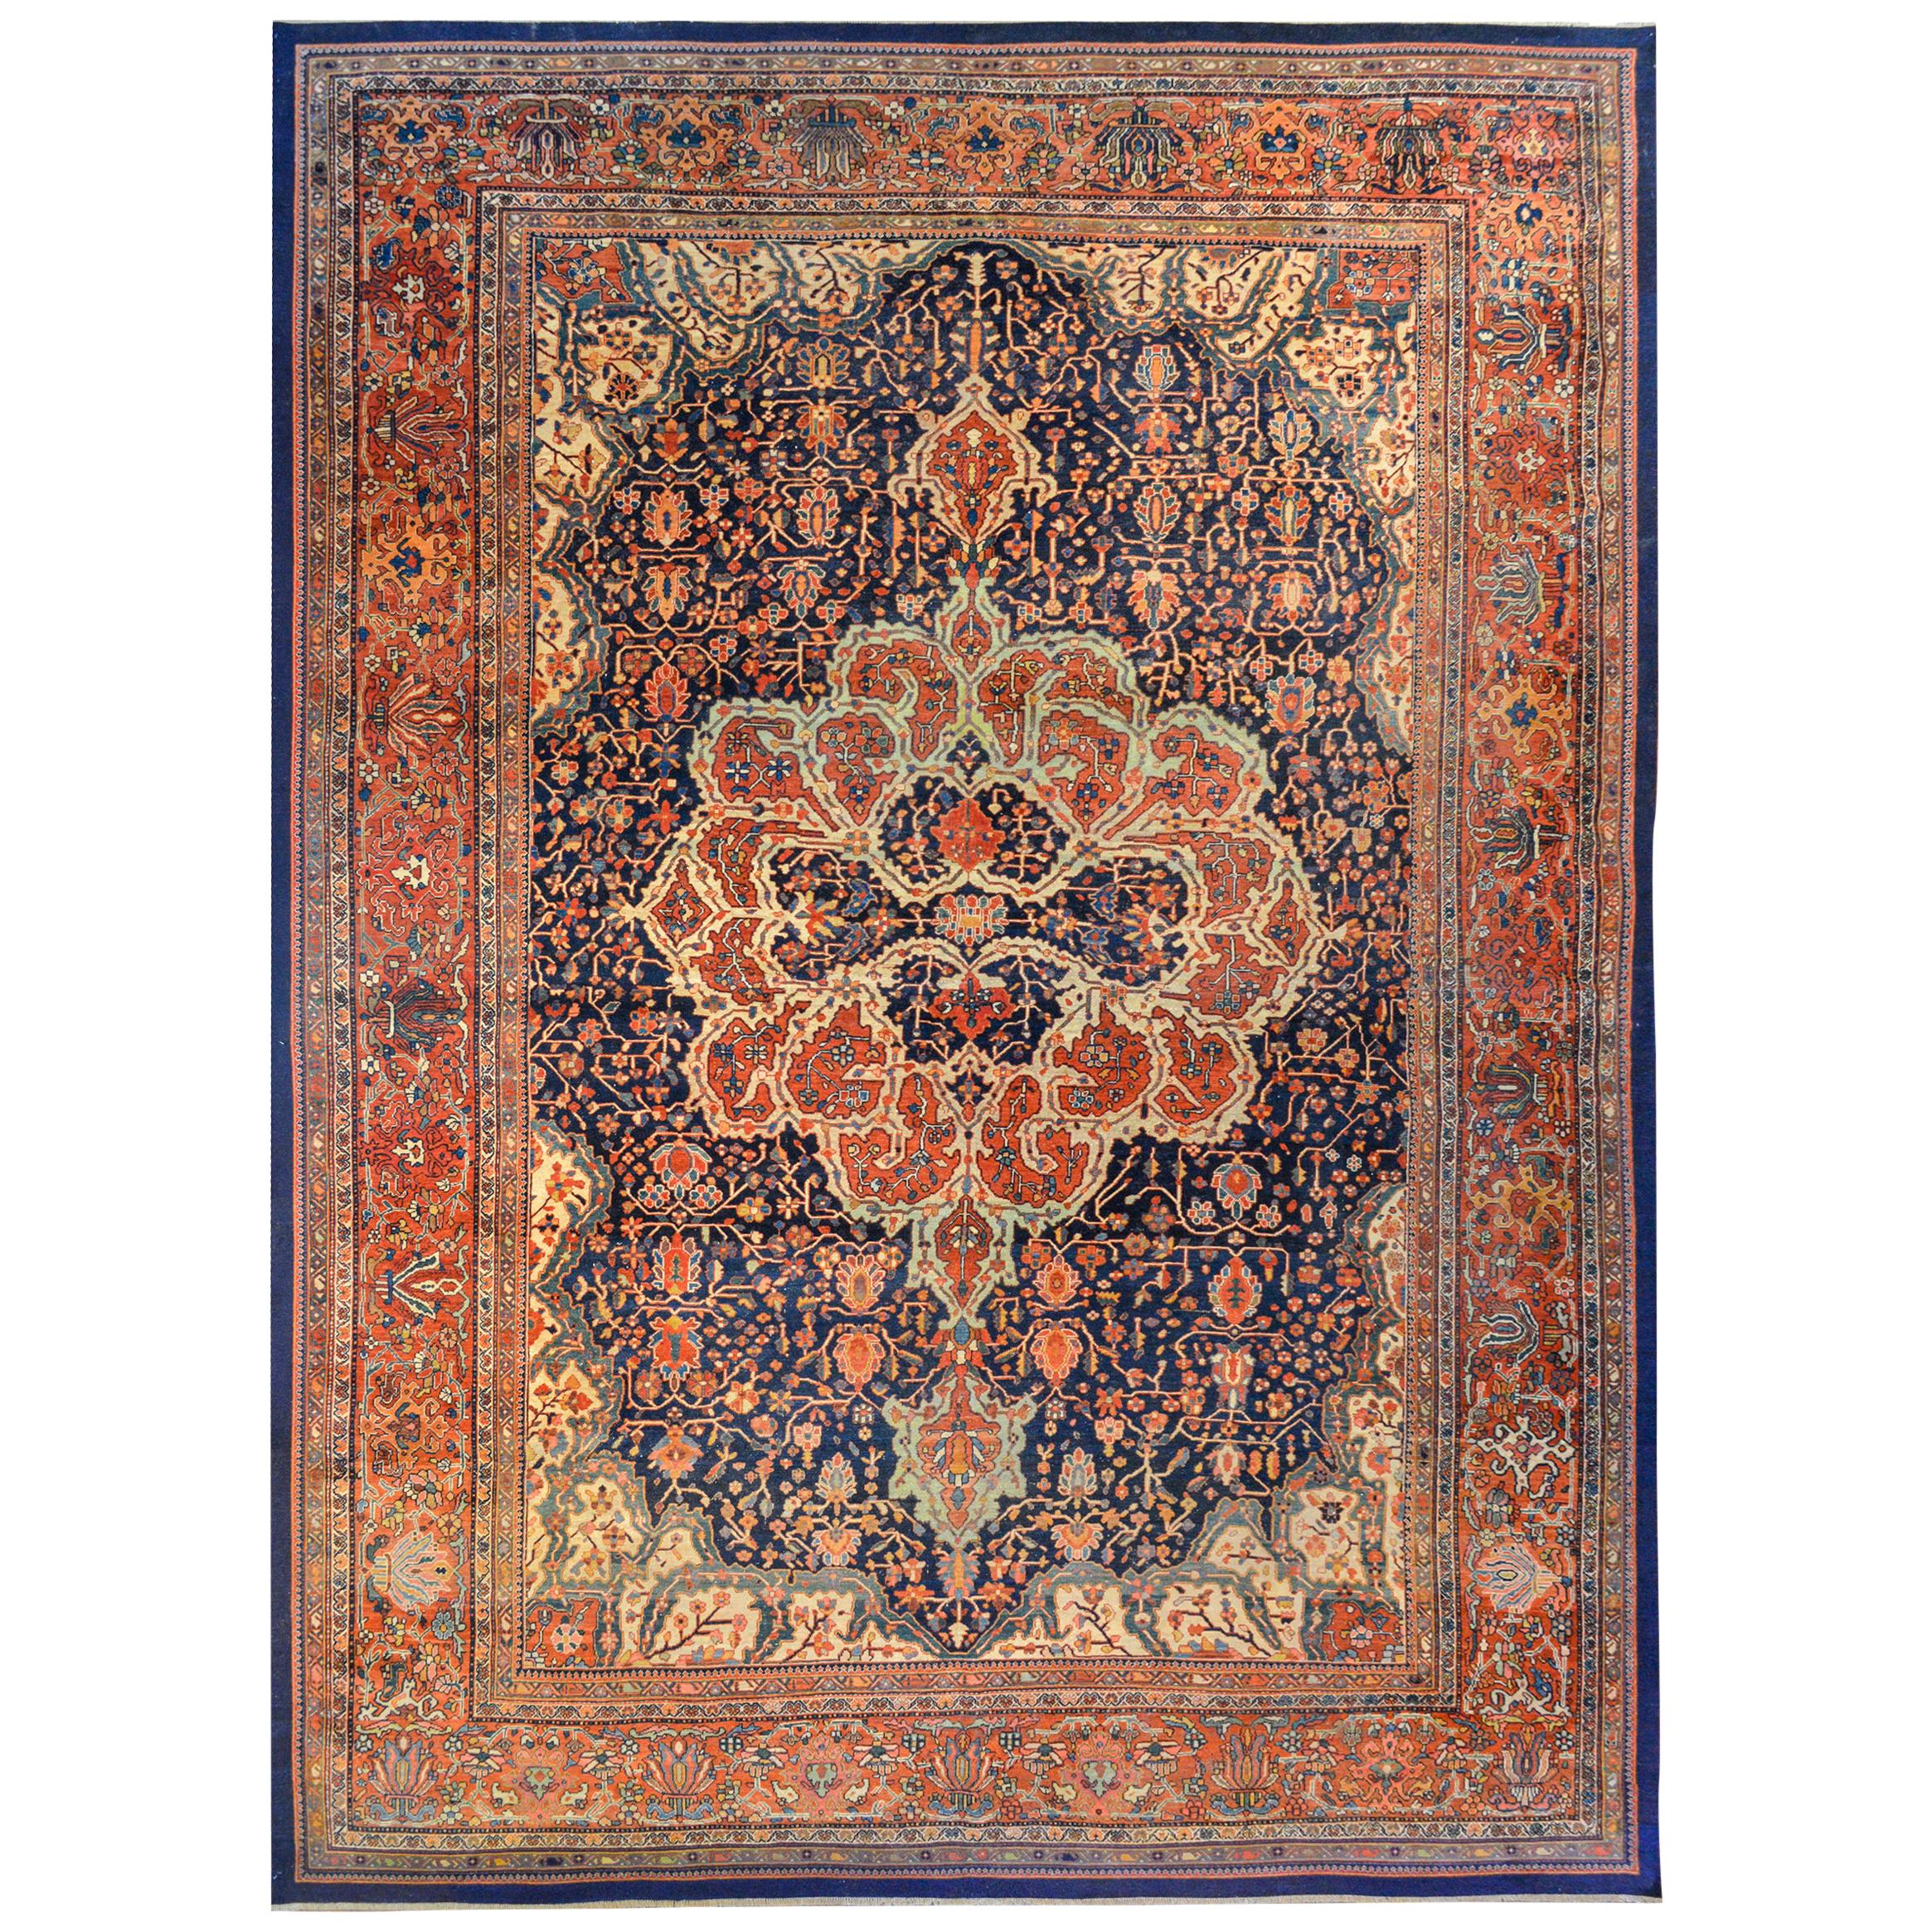 Outstanding Early 20th Century Sarouk Farahan Rug For Sale